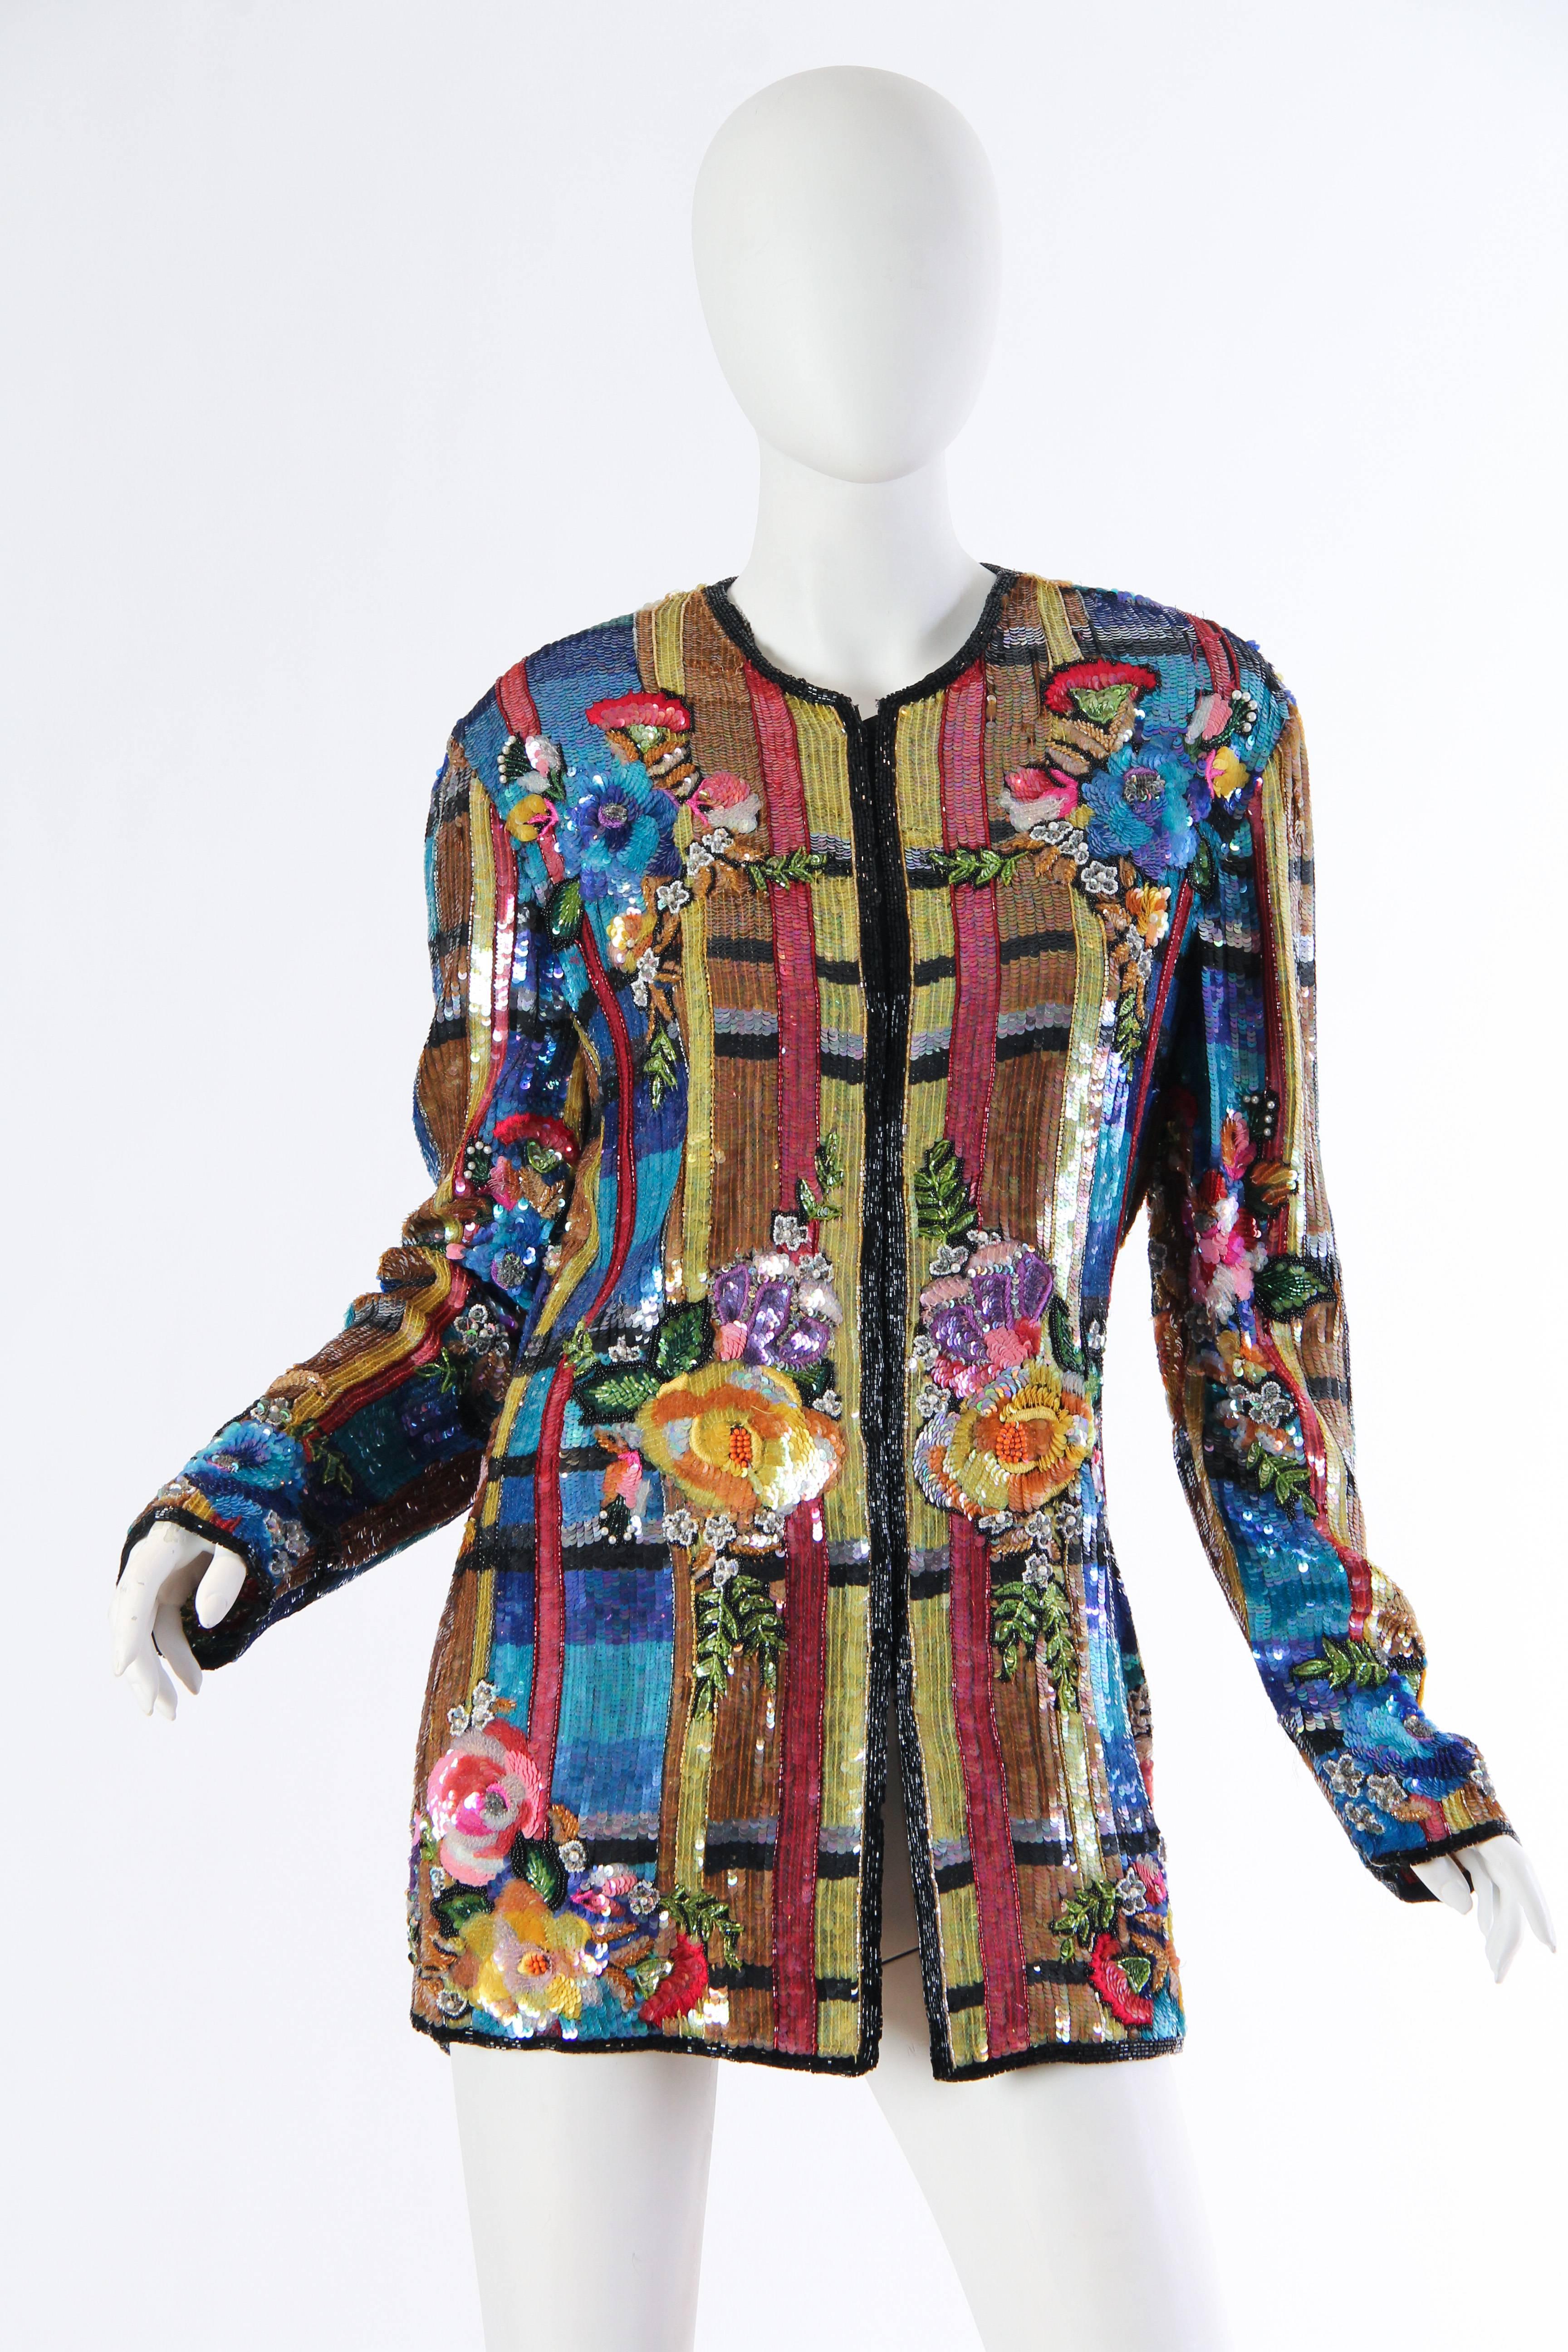 1980s sequins and beads from Naeem Khan. Why wear Balmain when you can wear Khan? Shimmering flat sequins create a color blocked ground upon the body in which artesian flowers of beads and embroidery bloom. This loosely cut jacket is easy to wear